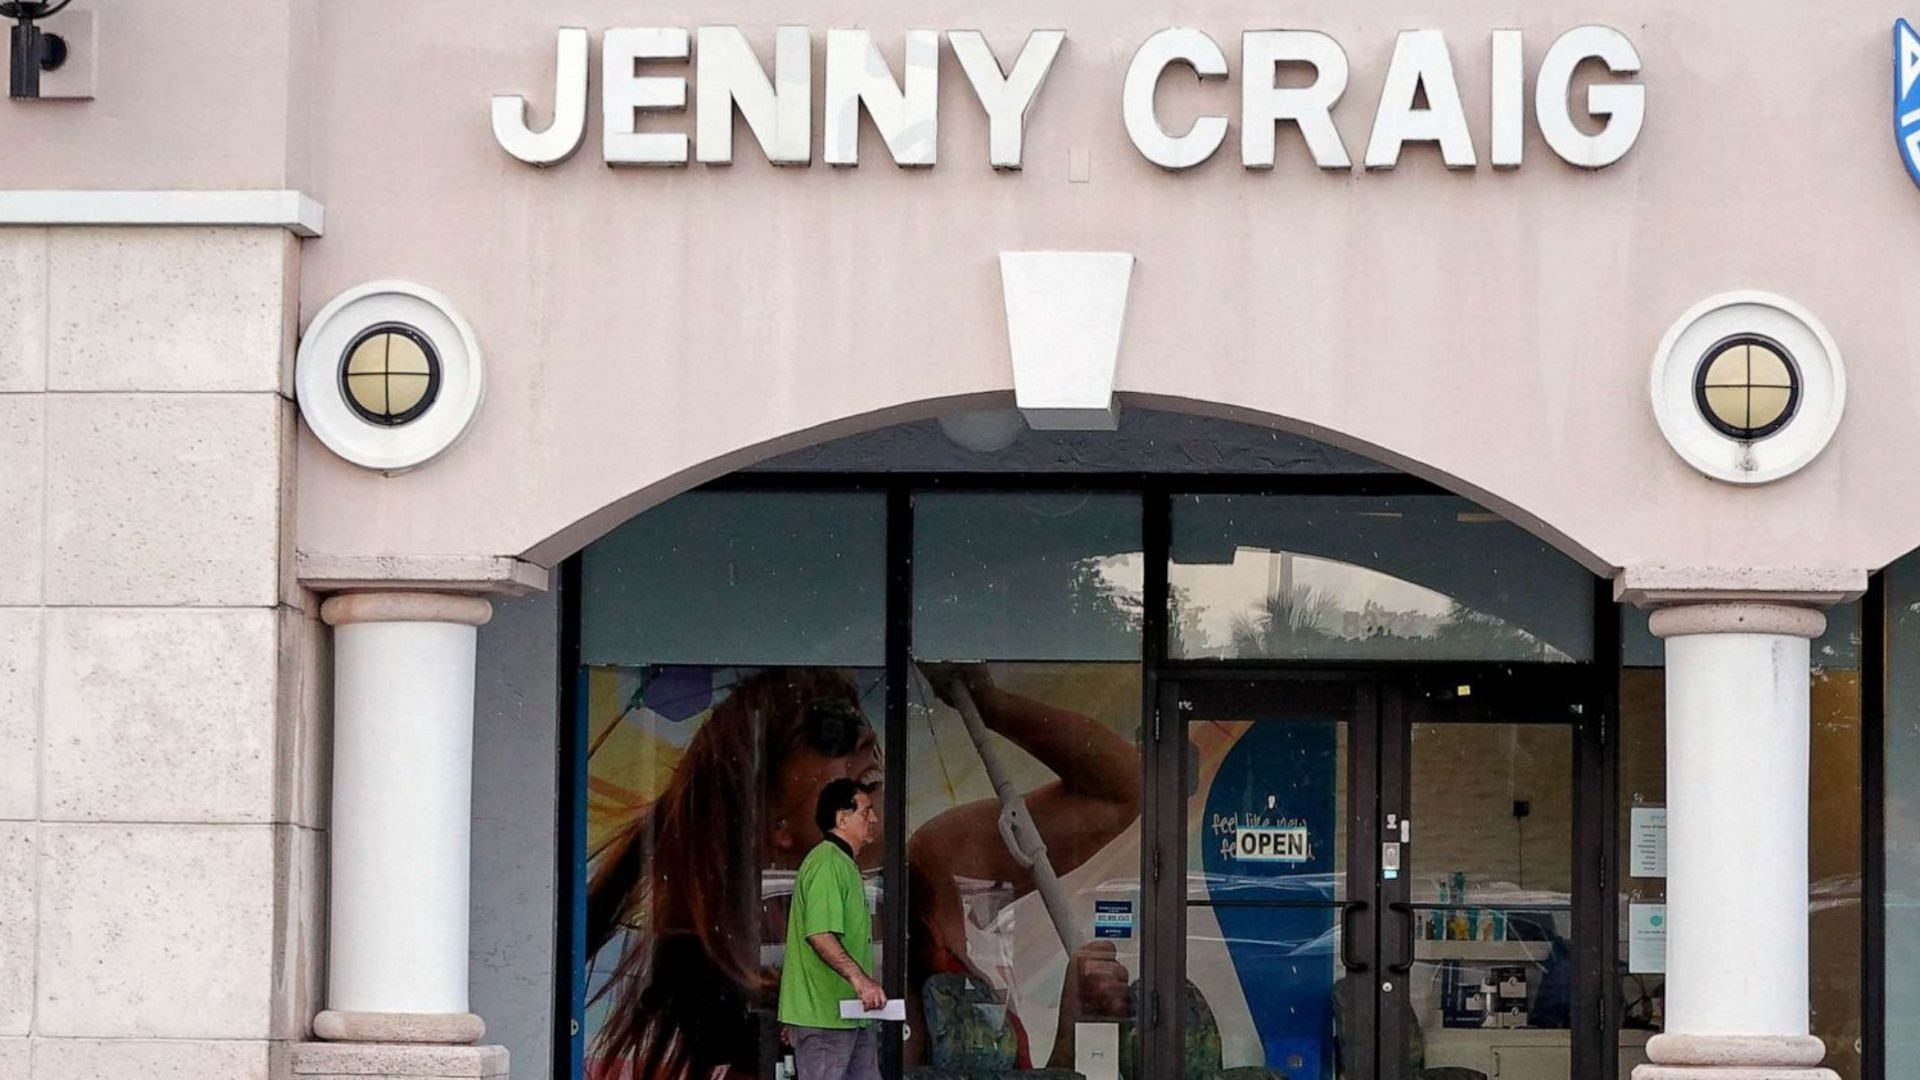 Jenny Craig faces major challenges from prescription drugs like Ozempic and Zegovy (Image via Joe Raedle/Getty Images)